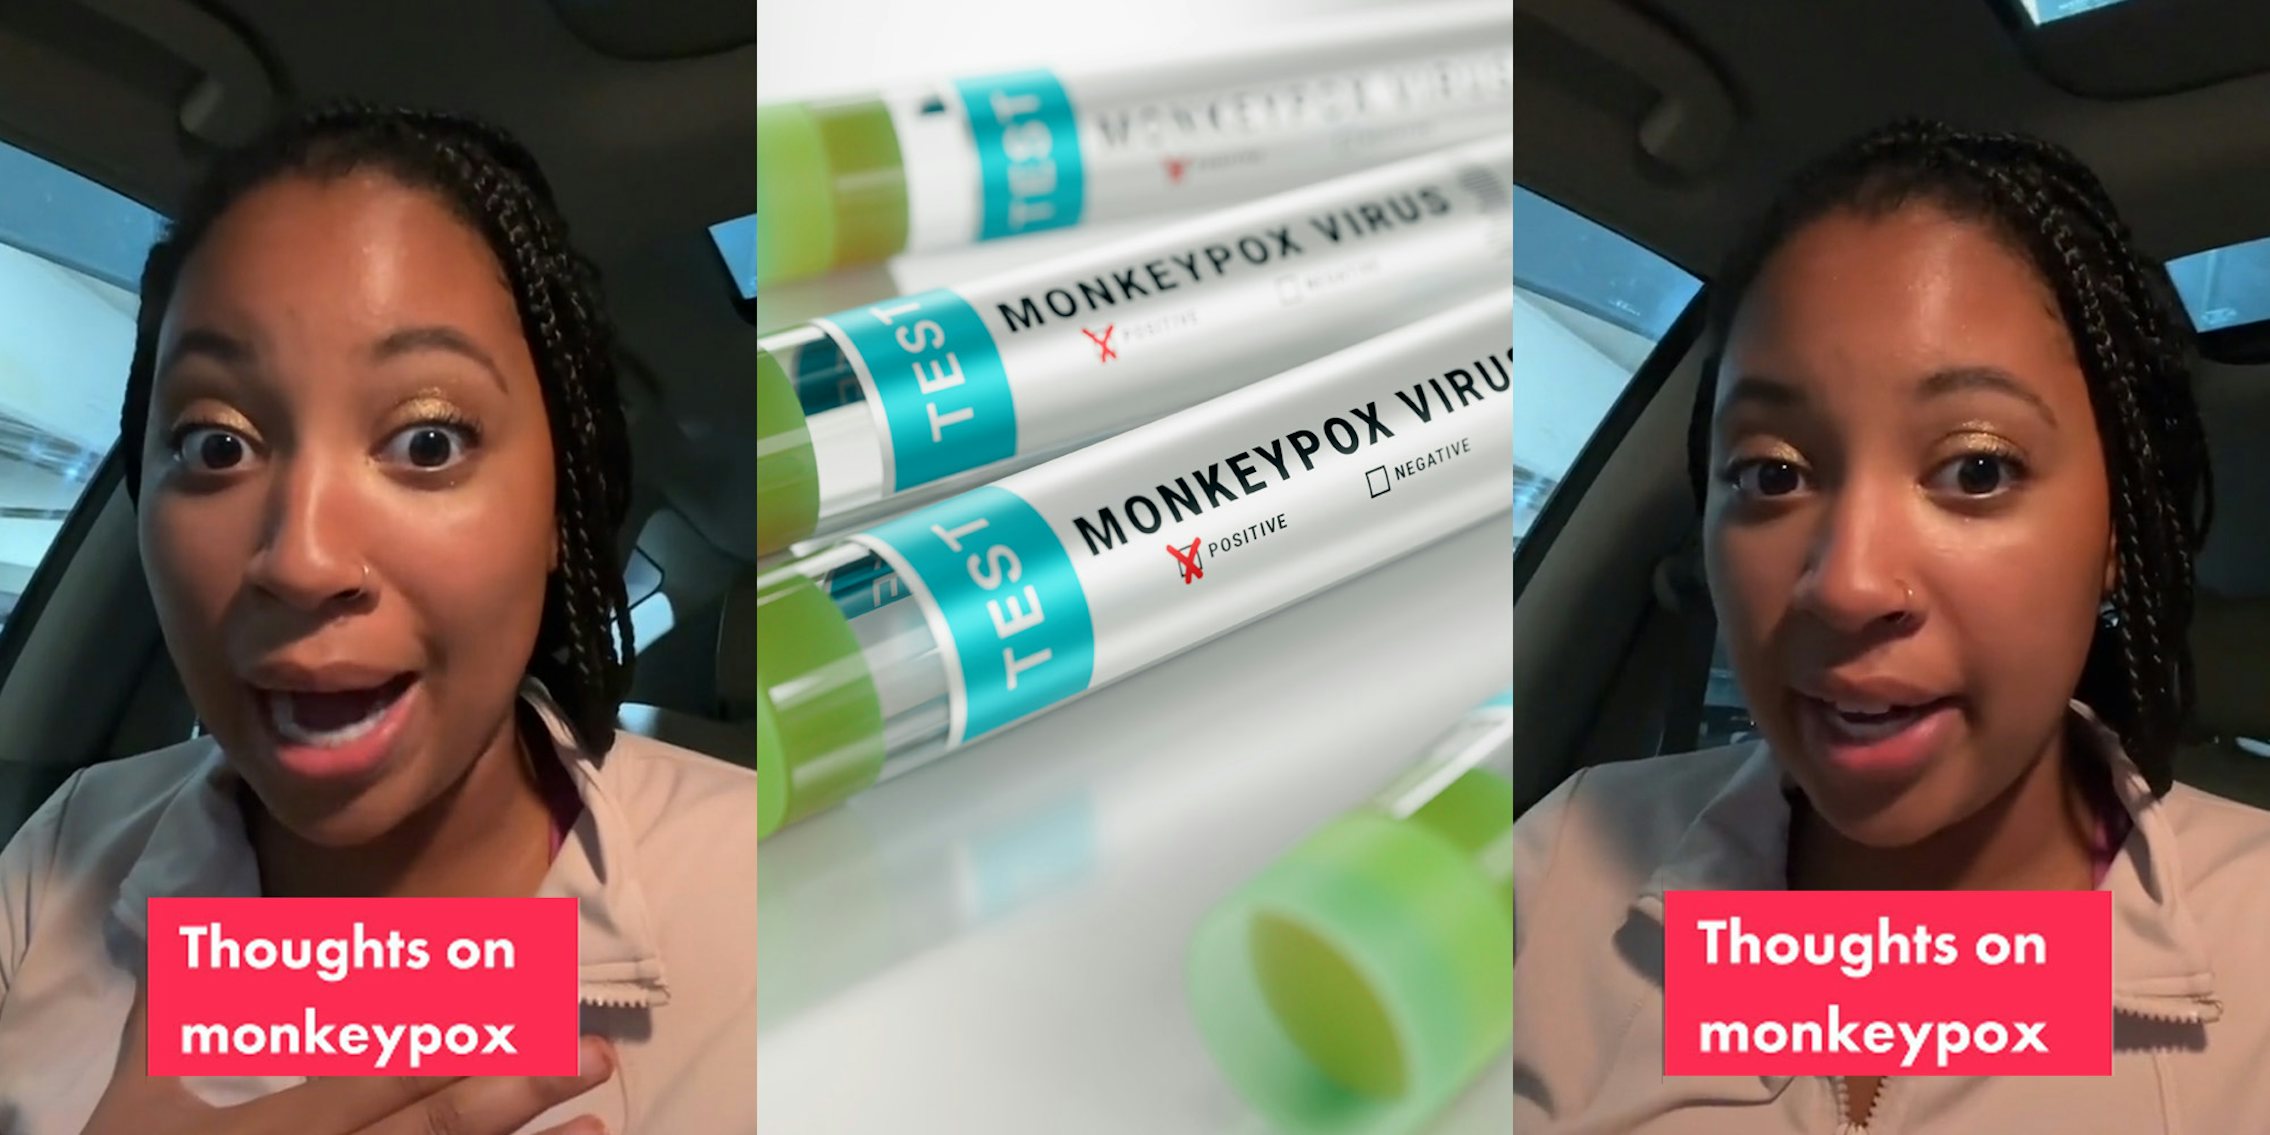 woman speaking in car caption 'Thoughts on monkeypox' (l) Test tubes on white table labeled 'Monkeypox Virus' 'TEST' (c) woman speaking in car caption 'Thoughts on monkeypox' (r)